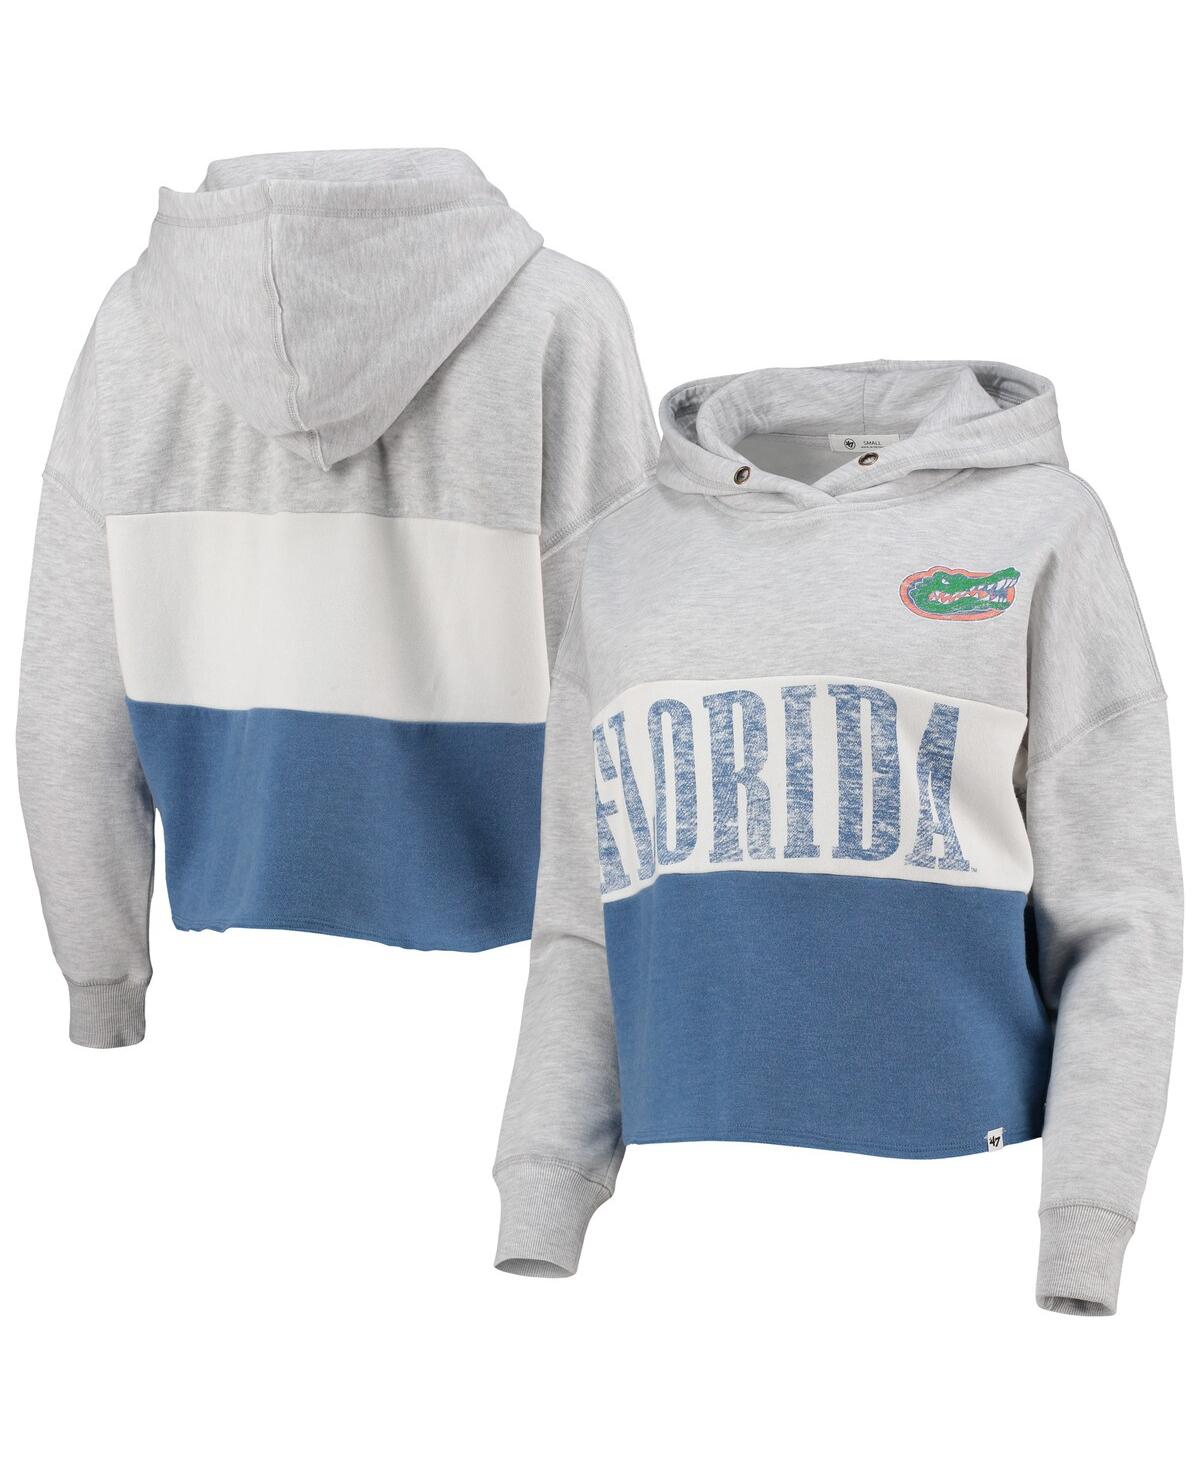 Women's '47 Heathered Gray and Heathered Royal Florida Gators Lizzy Colorblocked Cropped Pullover Hoodie - Heathered Gray, Heathered Royal